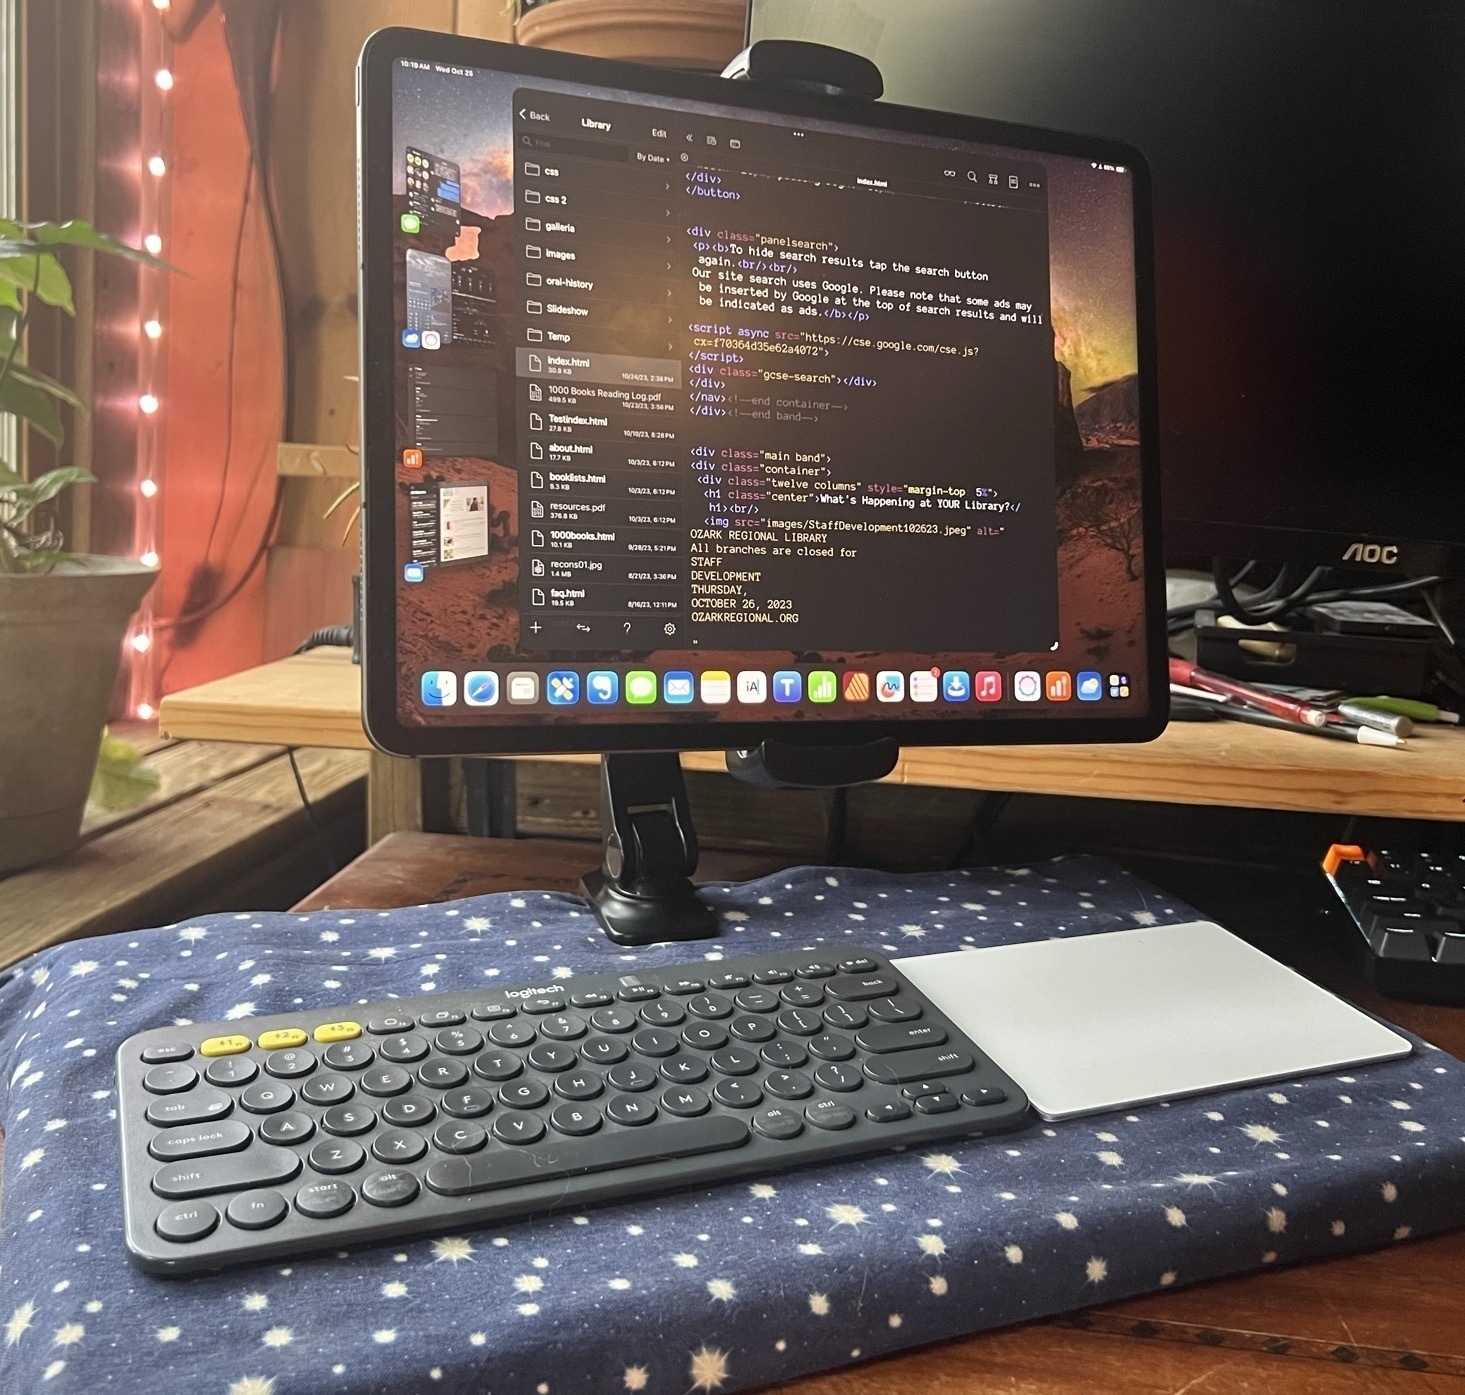 An iPad Pro floats above keyboard and trackpad on a lap desk. The iPad is held up by a configurable arm that is clamped to the back of the wood lap desk. Image taken is front of iPad so only the clamp is visible.